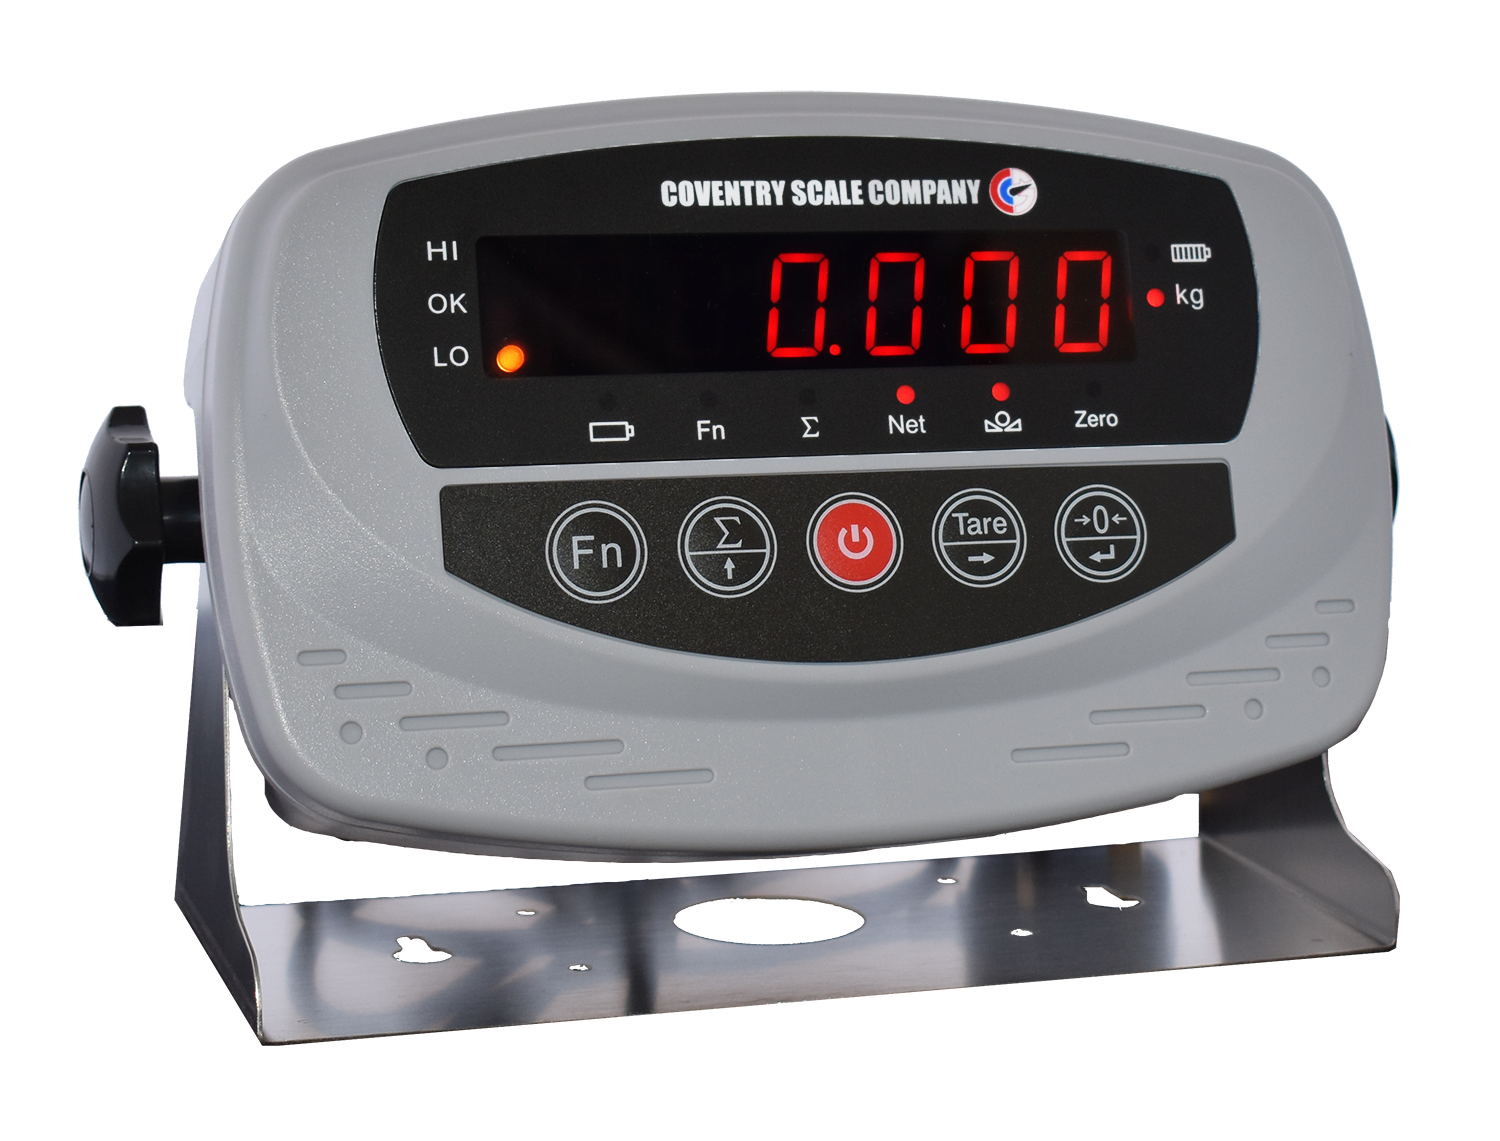 The CSC T1 display unit is perfect for basic weighing applications